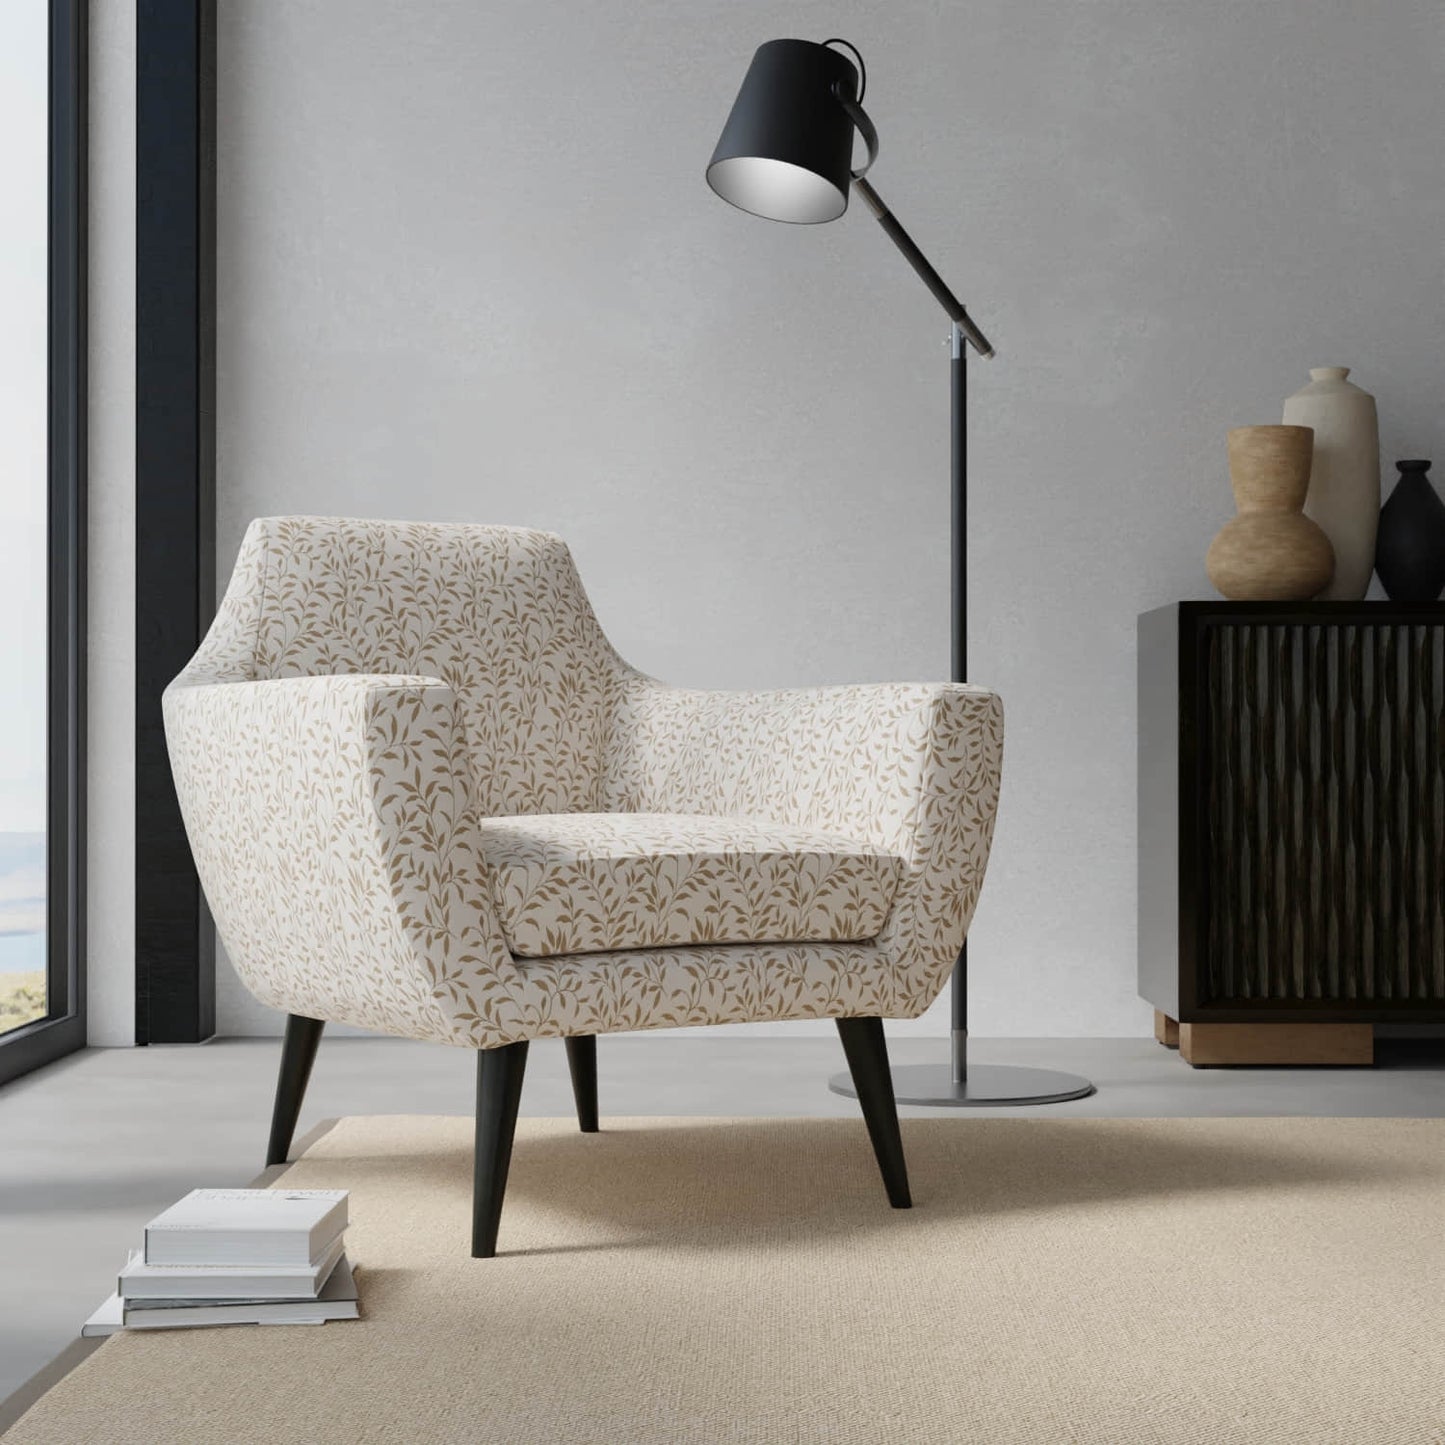 Brantley Honey upholstered on a contemporary chair